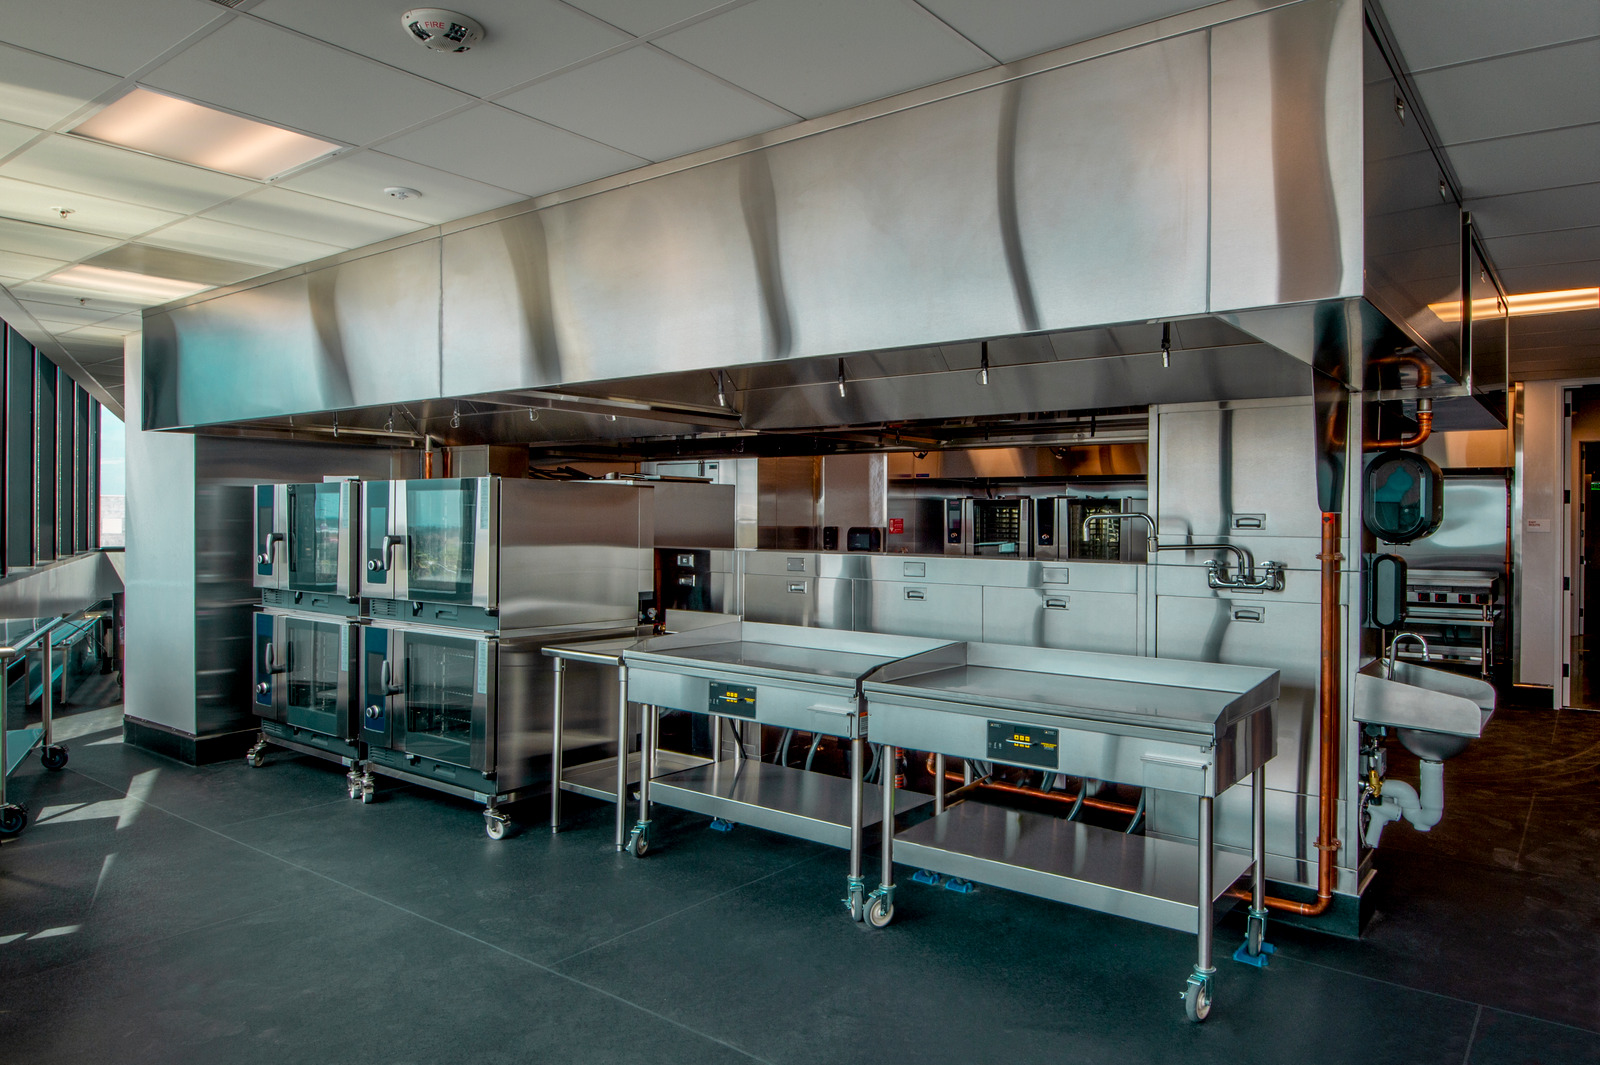 A fully equipped restaurant kitchen